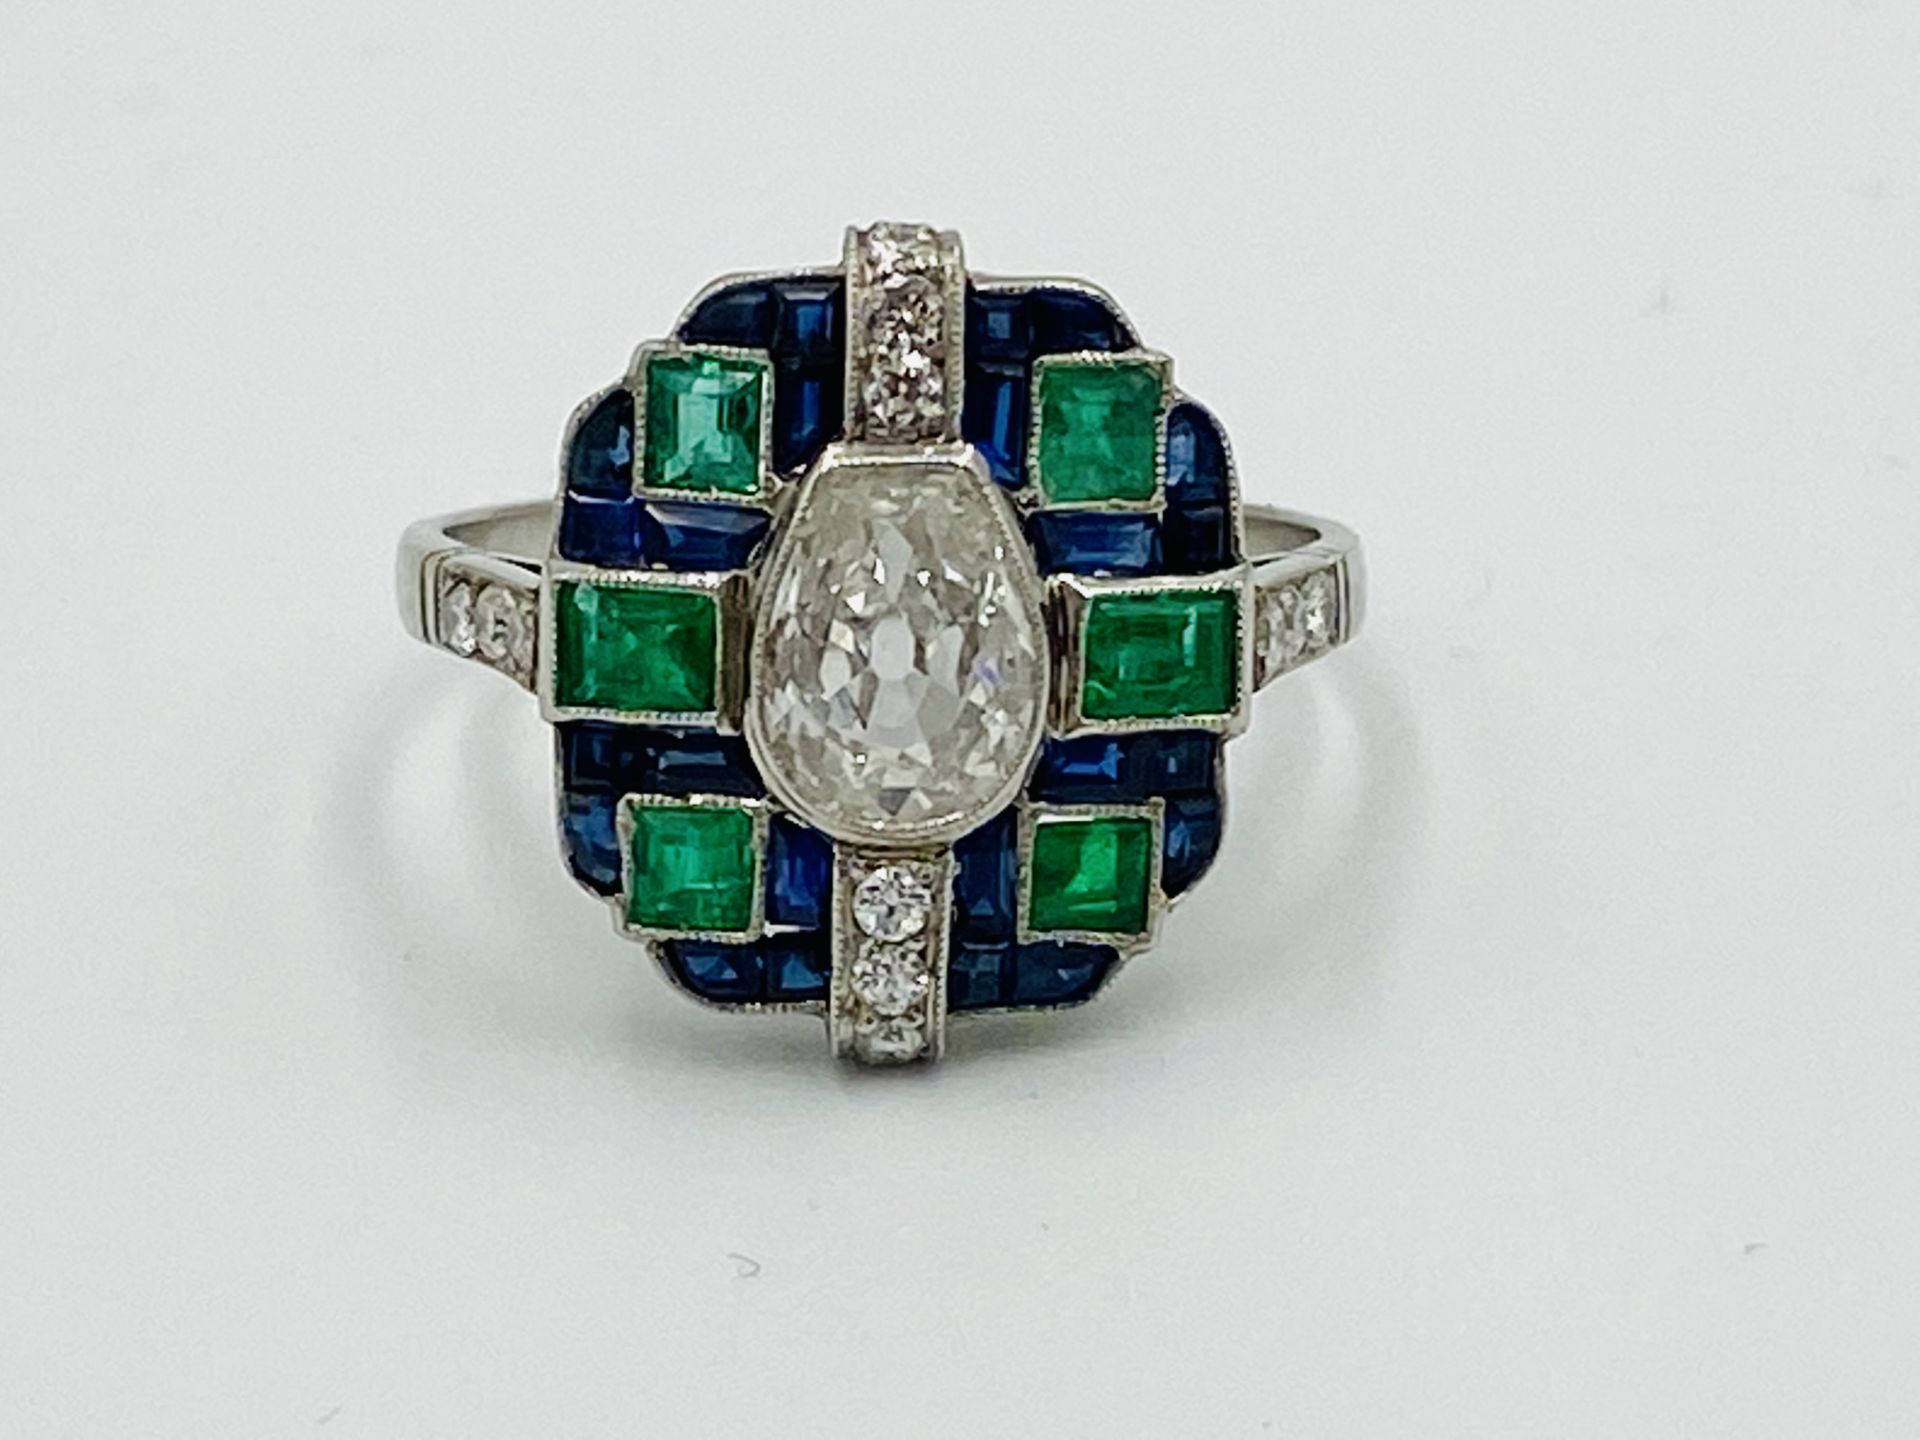 Platinum ring set with diamonds, sapphires and emeralds